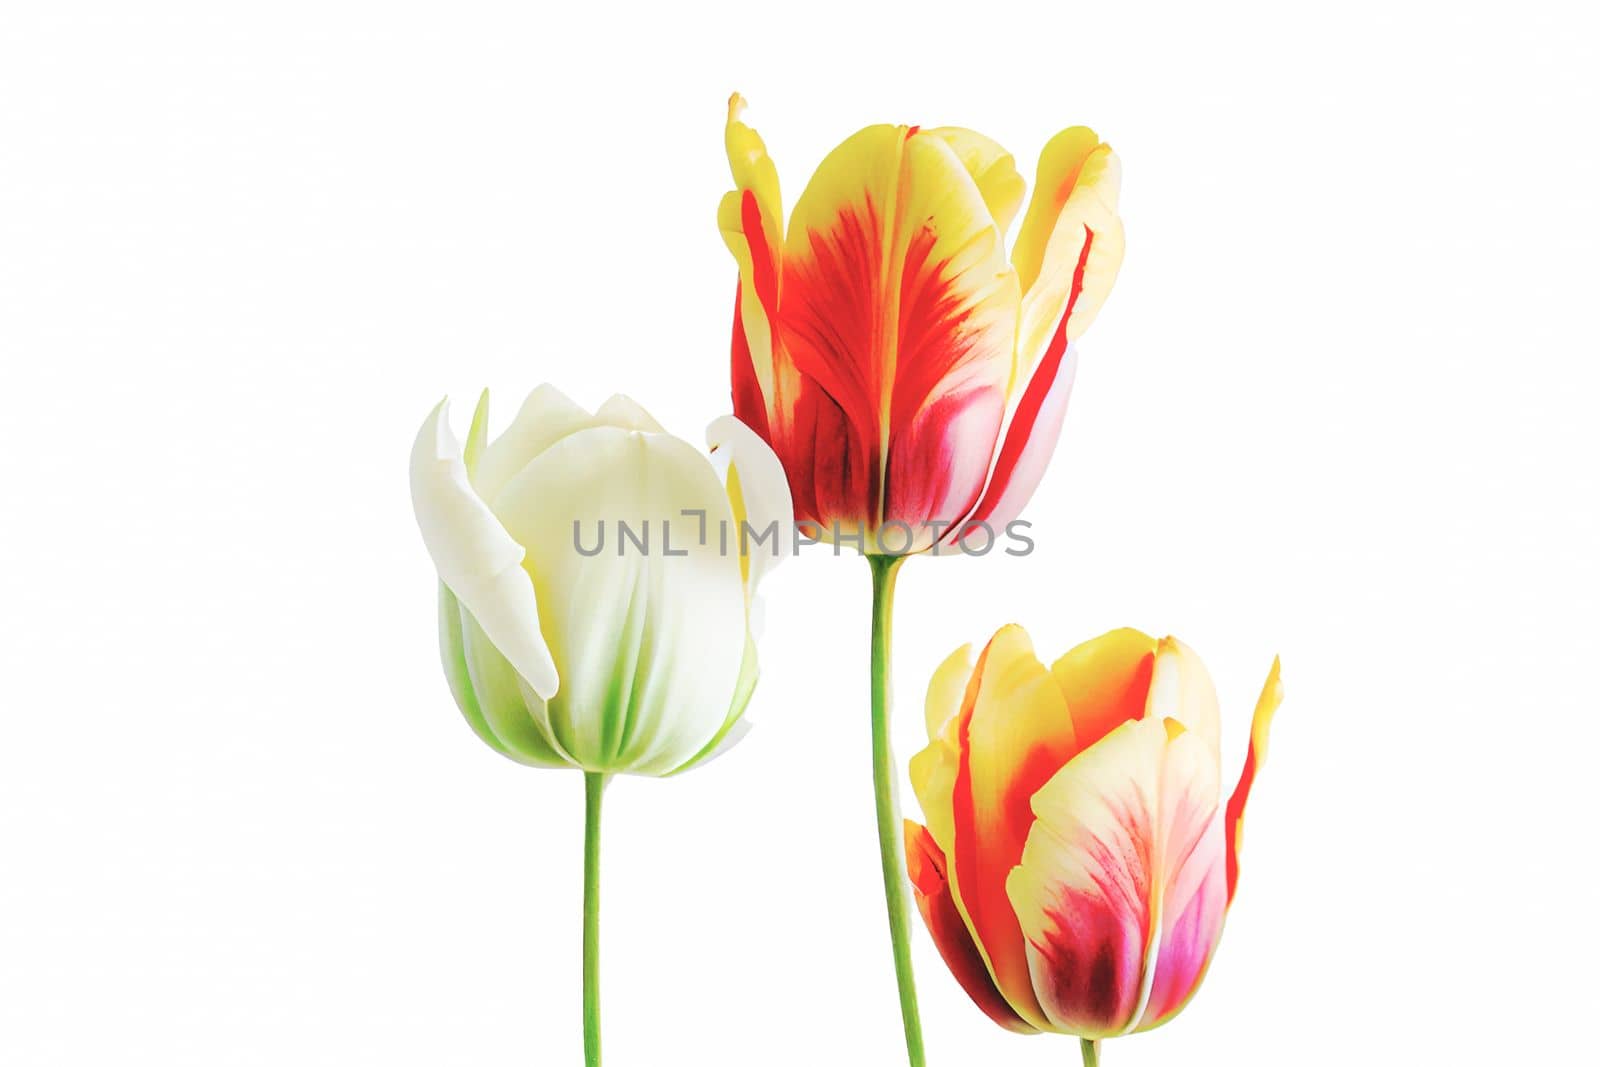 Bouquet of fresh tulip flowers in different colors, isolated on white background with copy space. Perfect for adding vibrant blooms to any project.